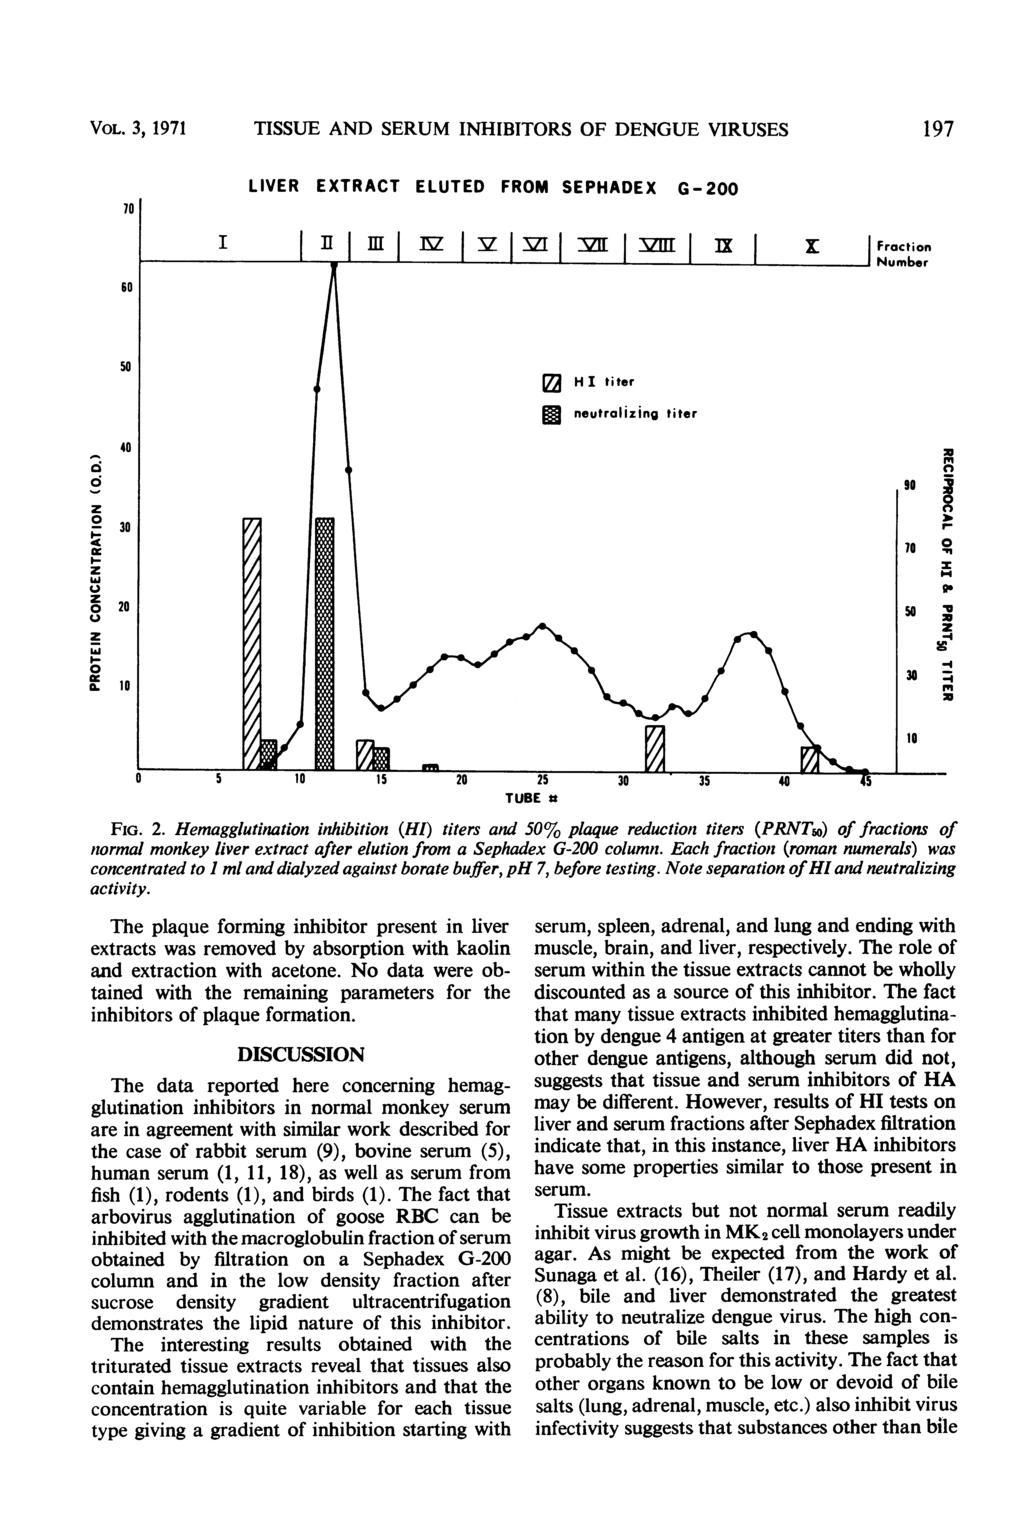 VOL. 3, 1971 7 6 TSSUE AND SERUM NHBTORS OF DENGUE VRUSES 197 LVER EXTRACT ELUTED FROM SEPHADEX G-2 aci 5 4 z 3.- z z Oo 2 z.-. 1 TUBE a 19 H titer * neutralizing titer 9 Z n r, A4 lo 5 = ẓ 4-4 3 : U FG.